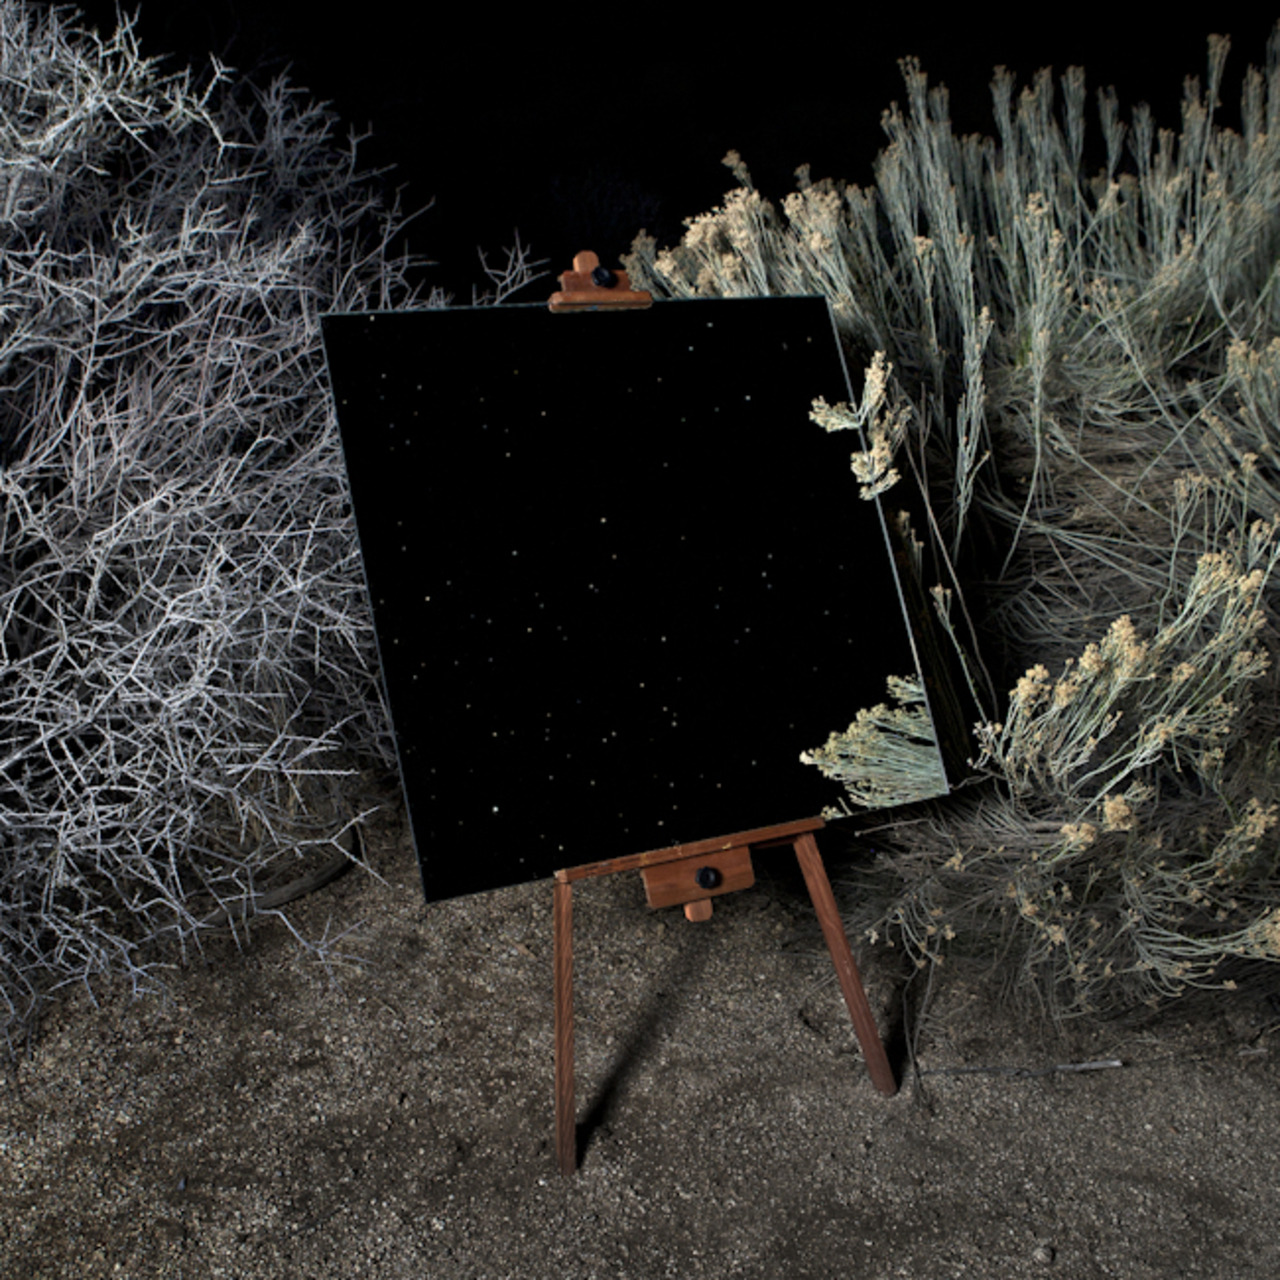 asylum-art:Photographs of Mirrors on Easels that Look Like Paintings in the Desert